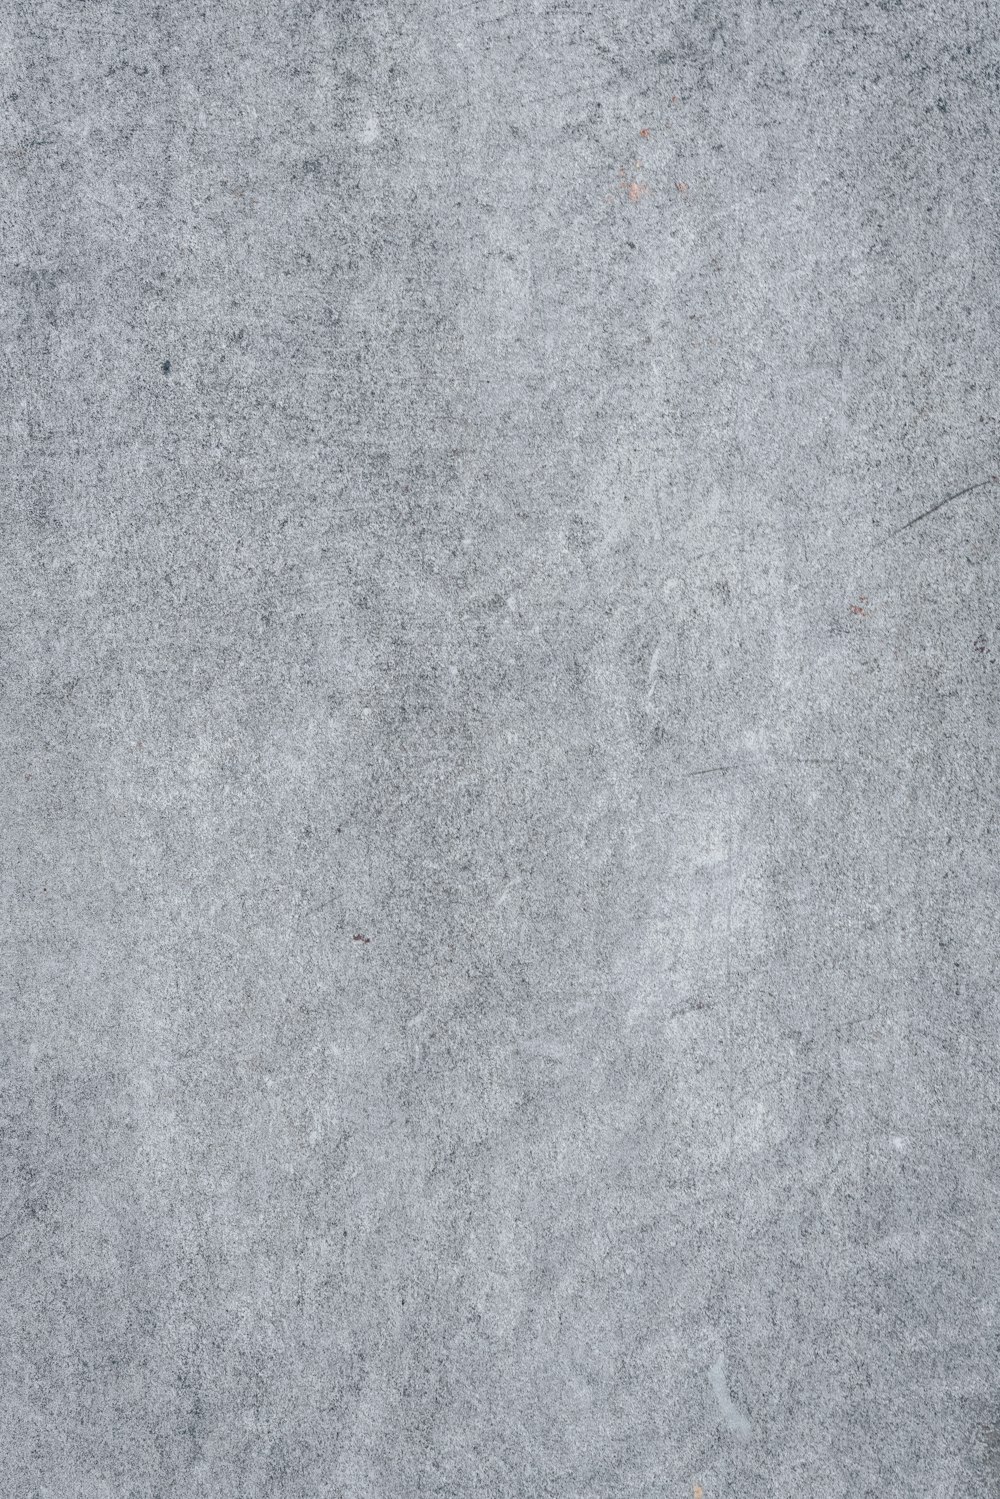 Grey Texture Pictures [HQ] | Download Free Images on Unsplash